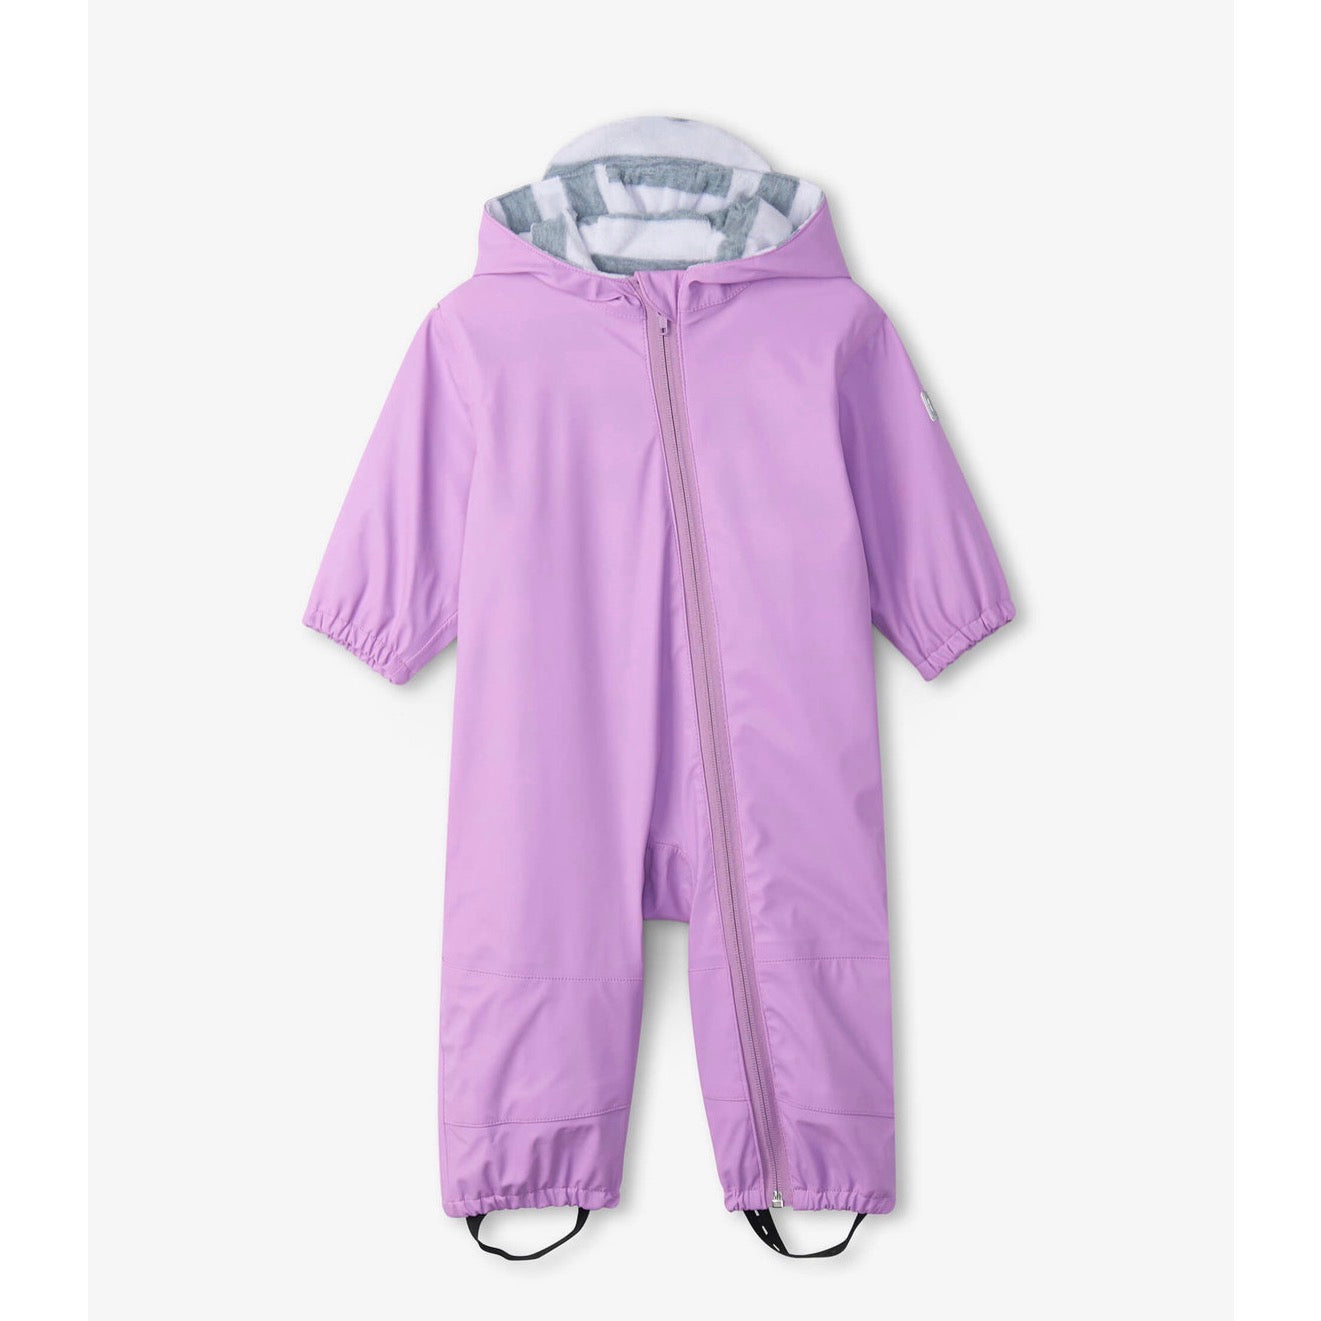 Hatley Terry Lined Lilac Bundler Clothing 9-12M / Lilac,12-18M / Lilac,18-24M / Lilac,2-3YRS / Lilac